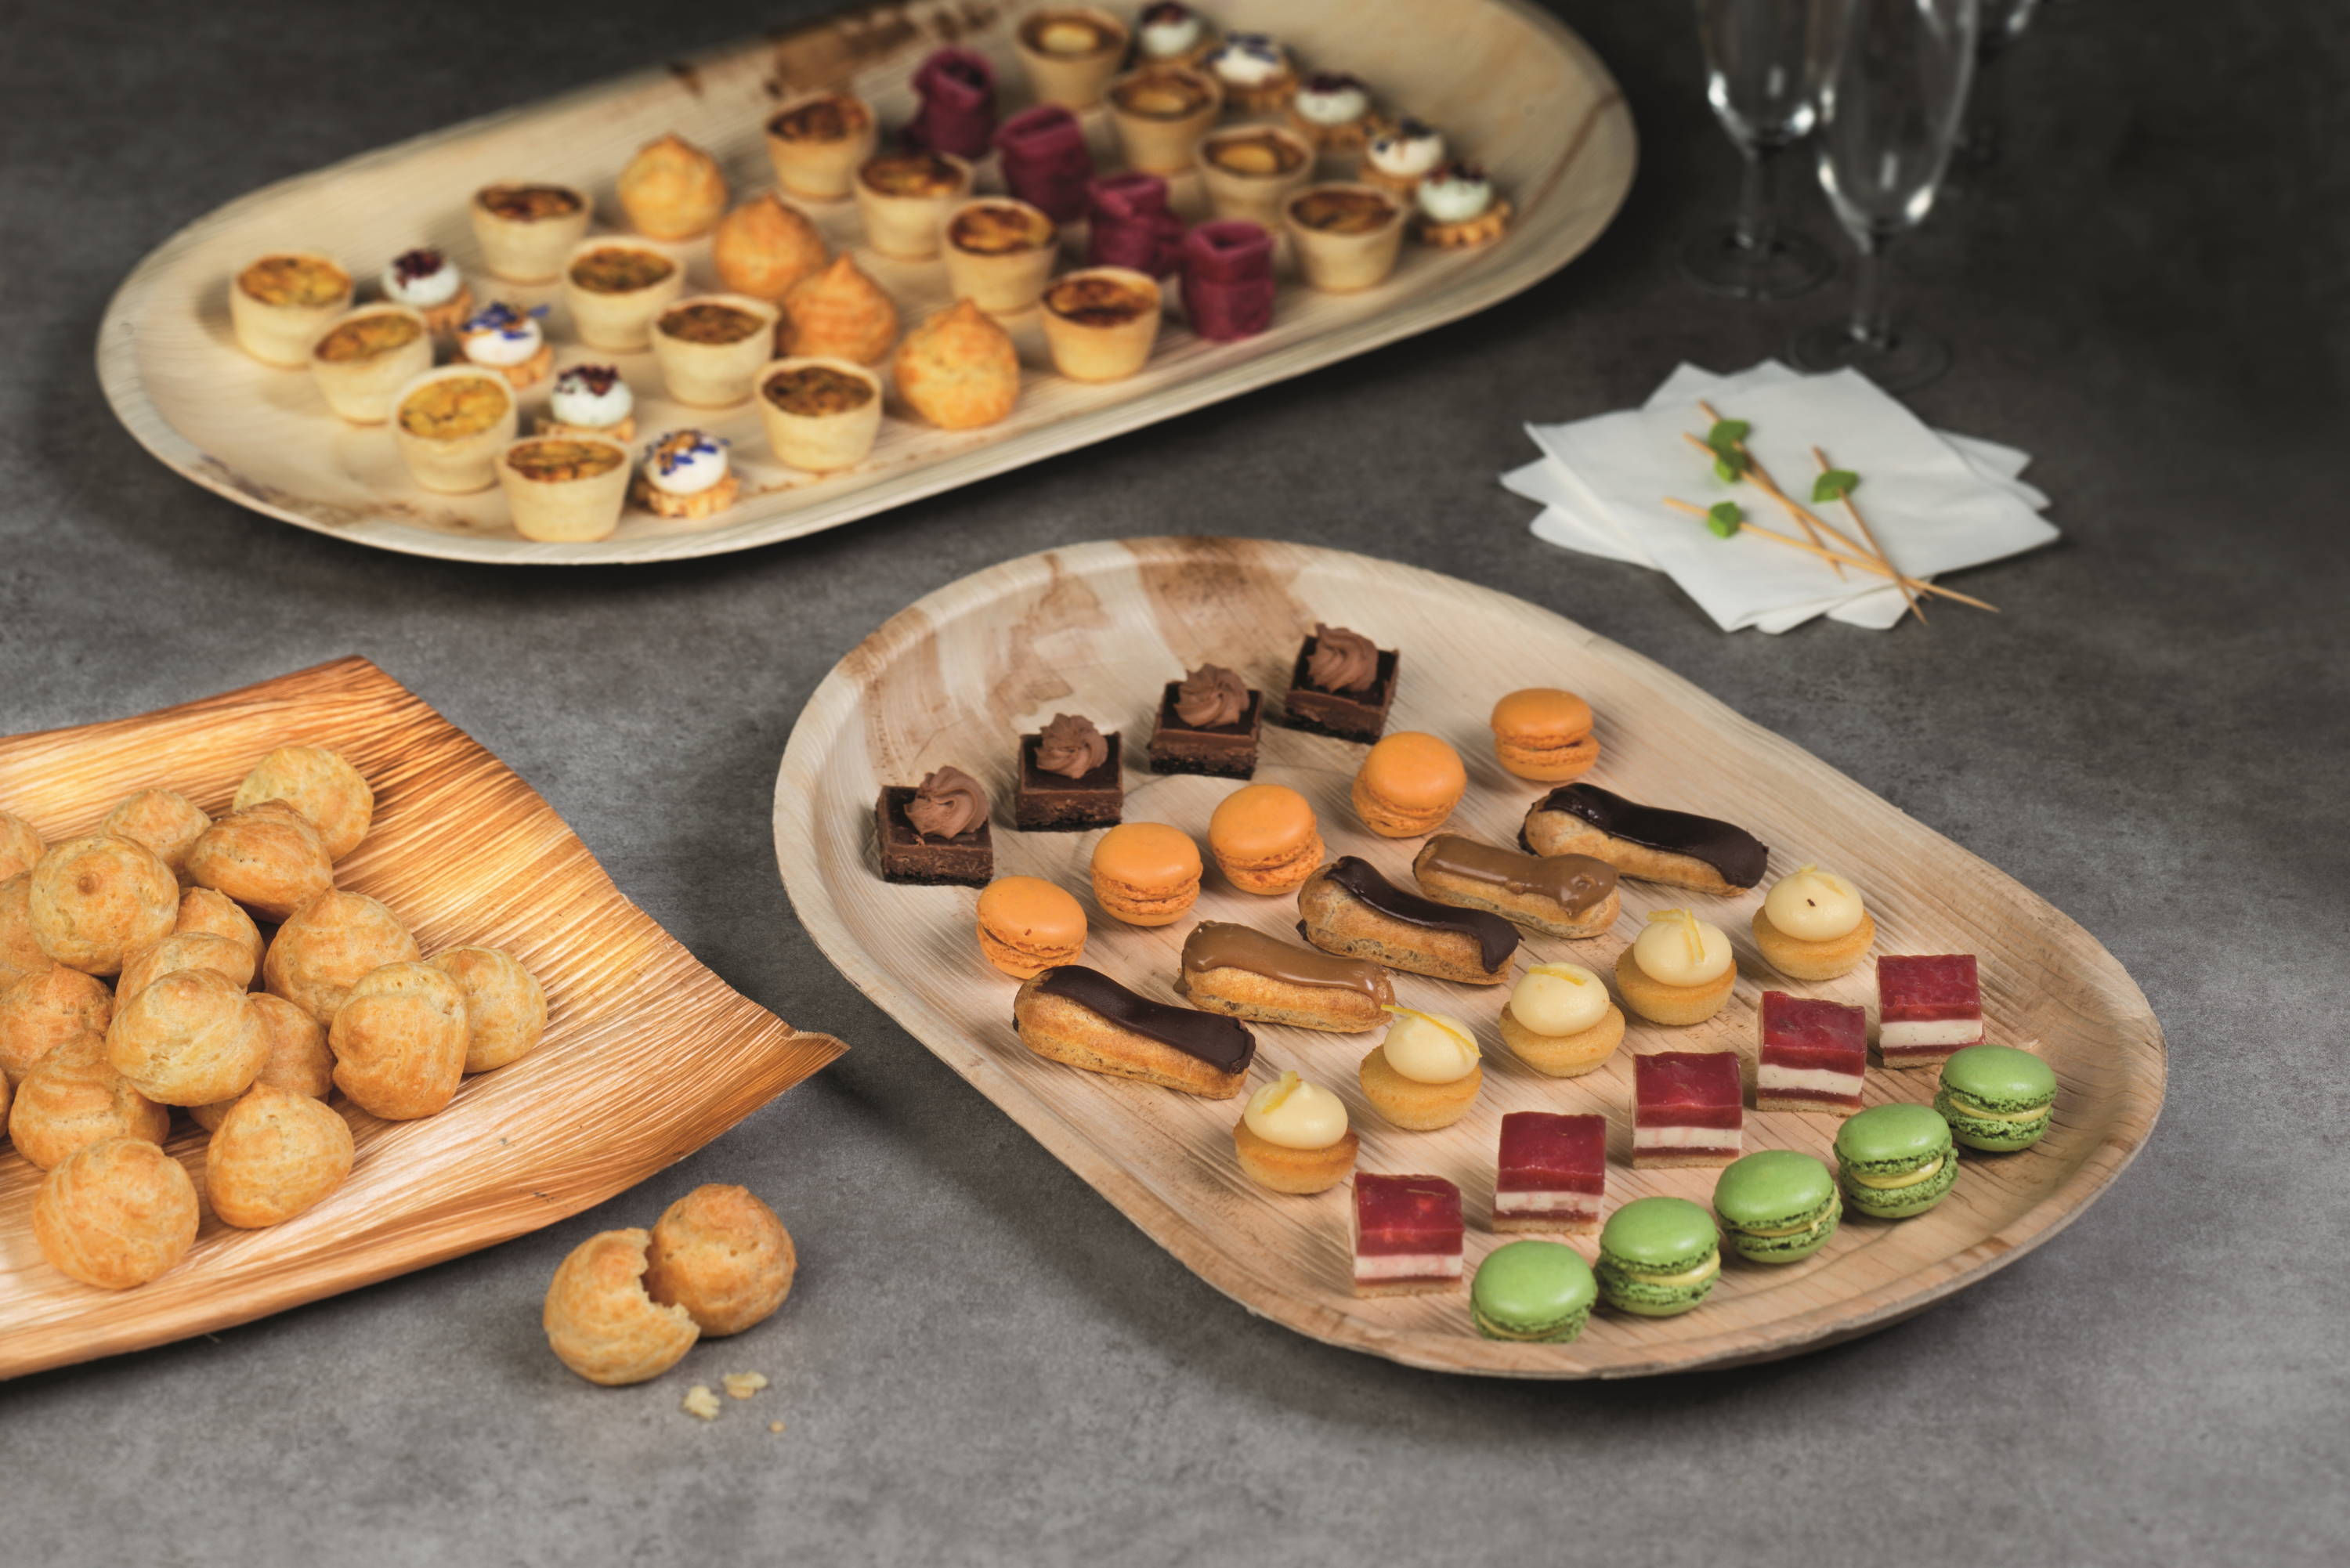 Eco-Friendly Entertaining Made Easy with Palm Leaf Disposable